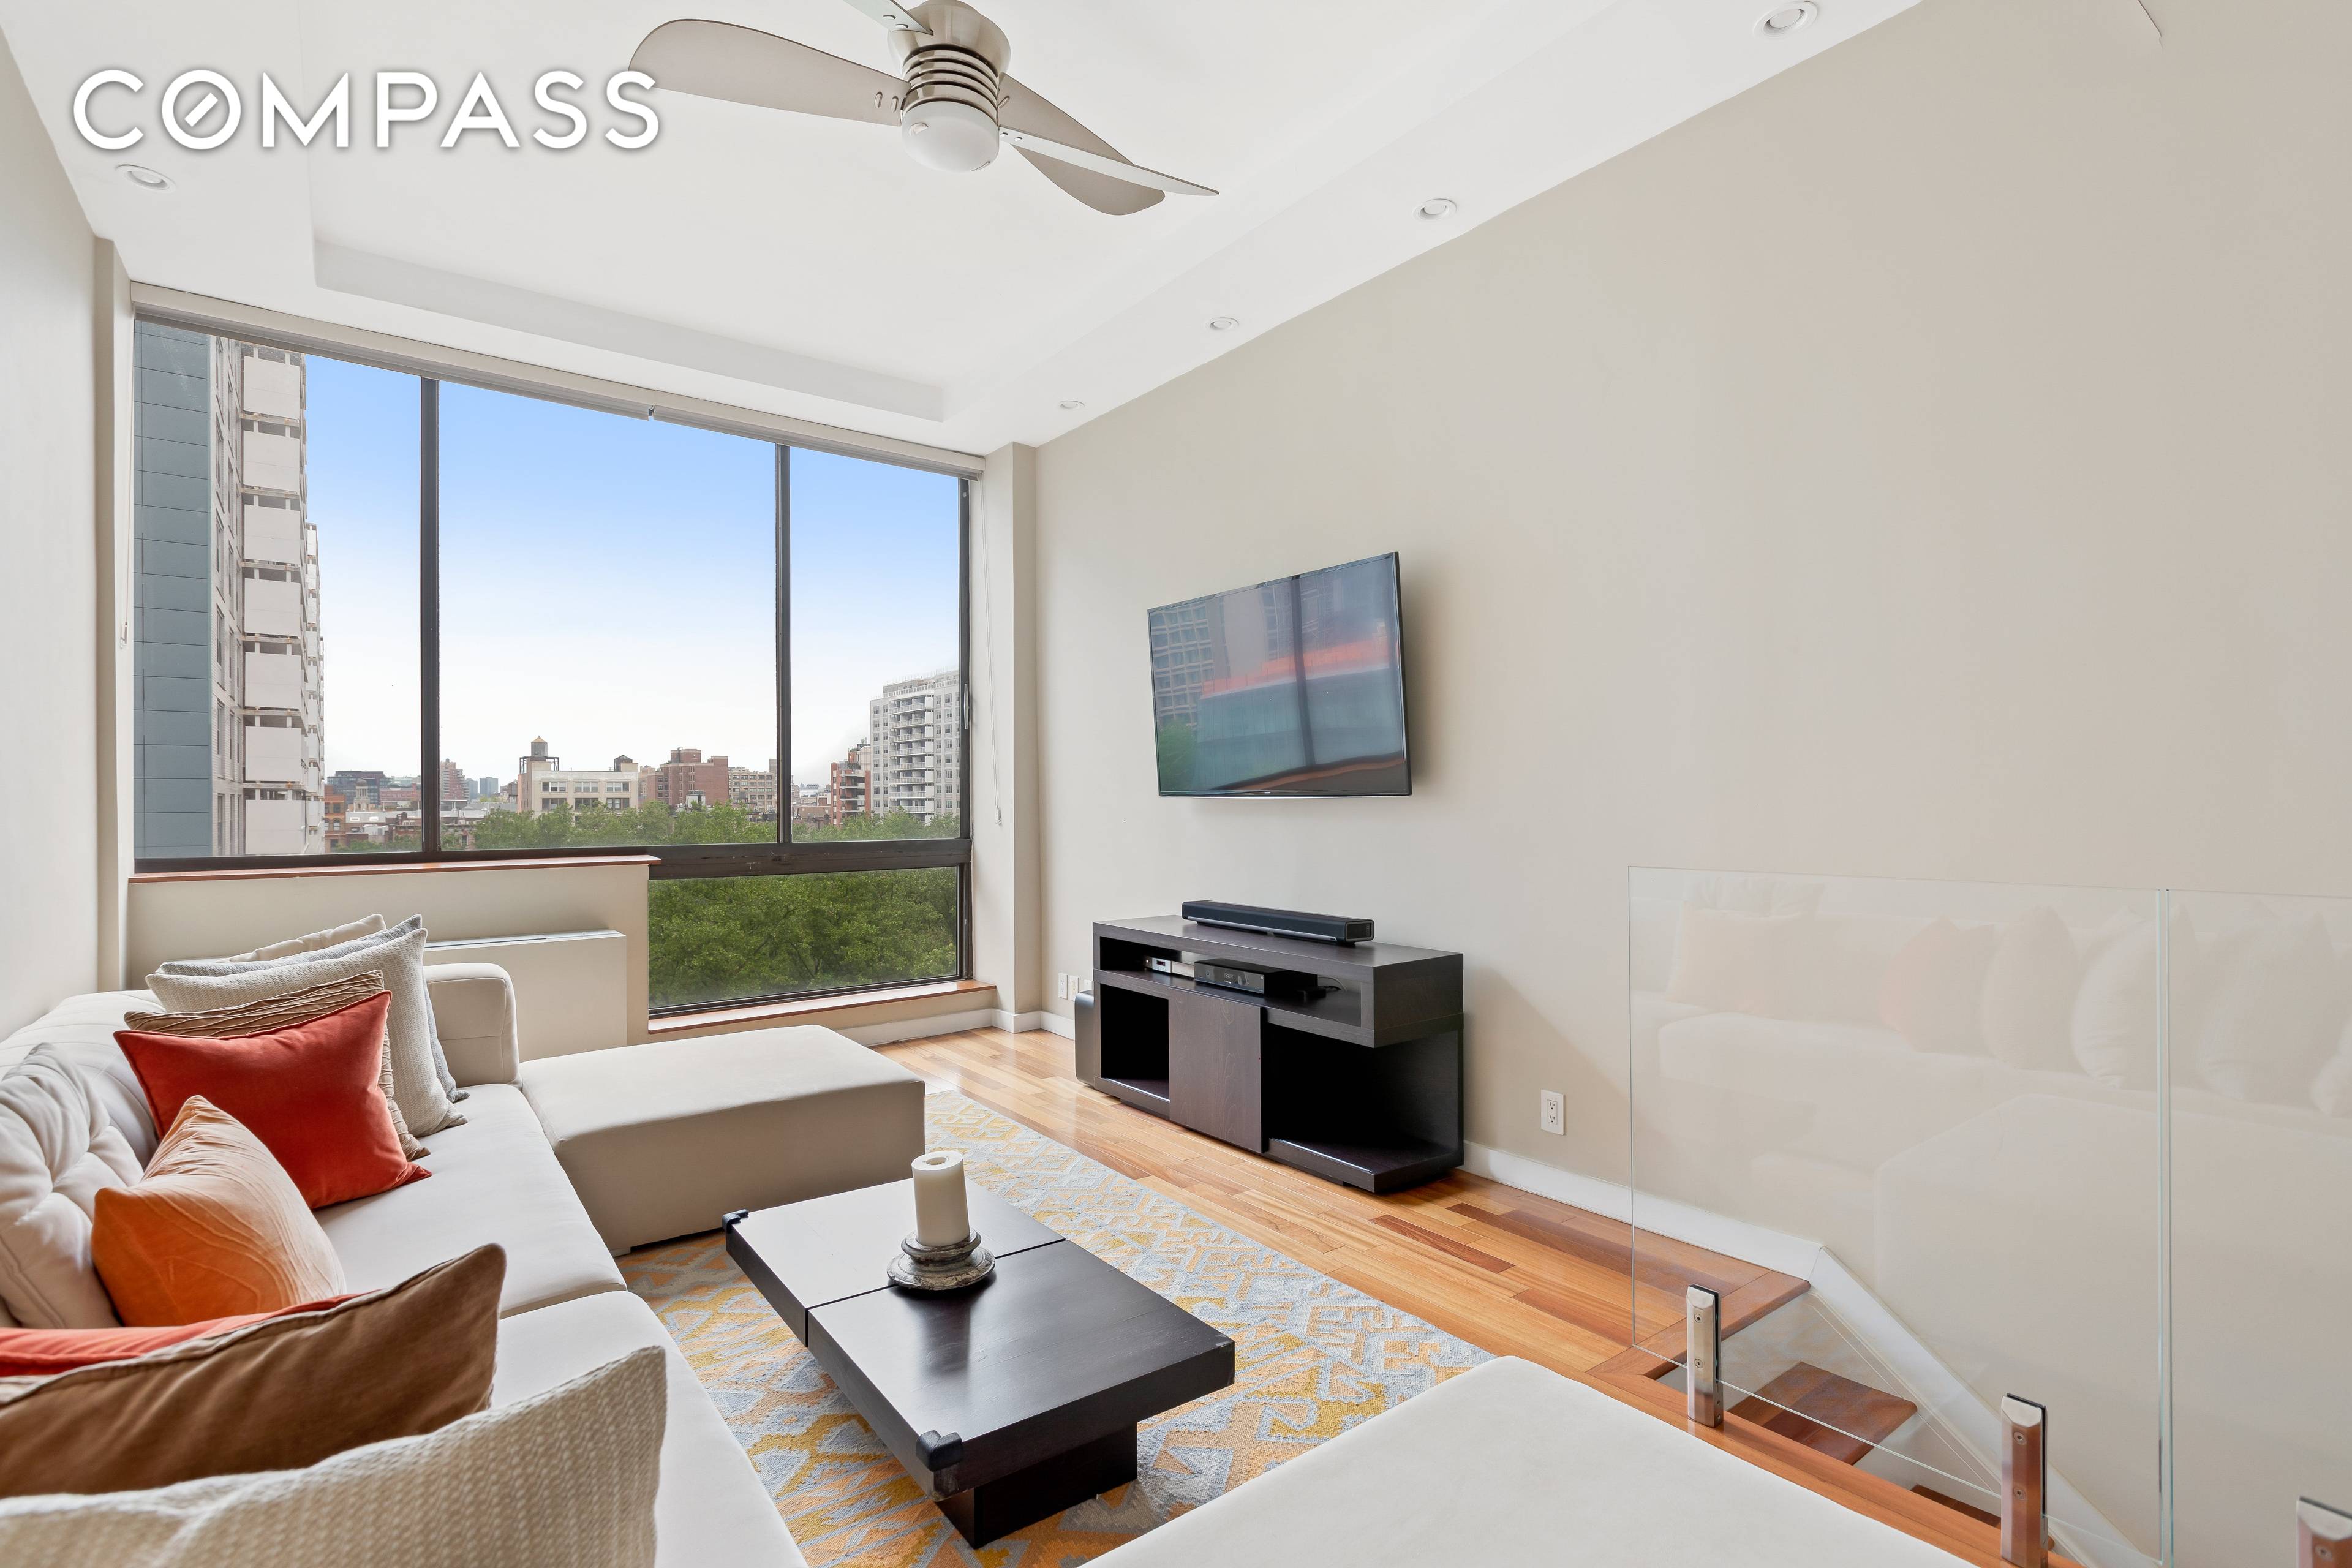 Upon entering this turn key duplex apartment, one is greeted by bright natural light and open sky.